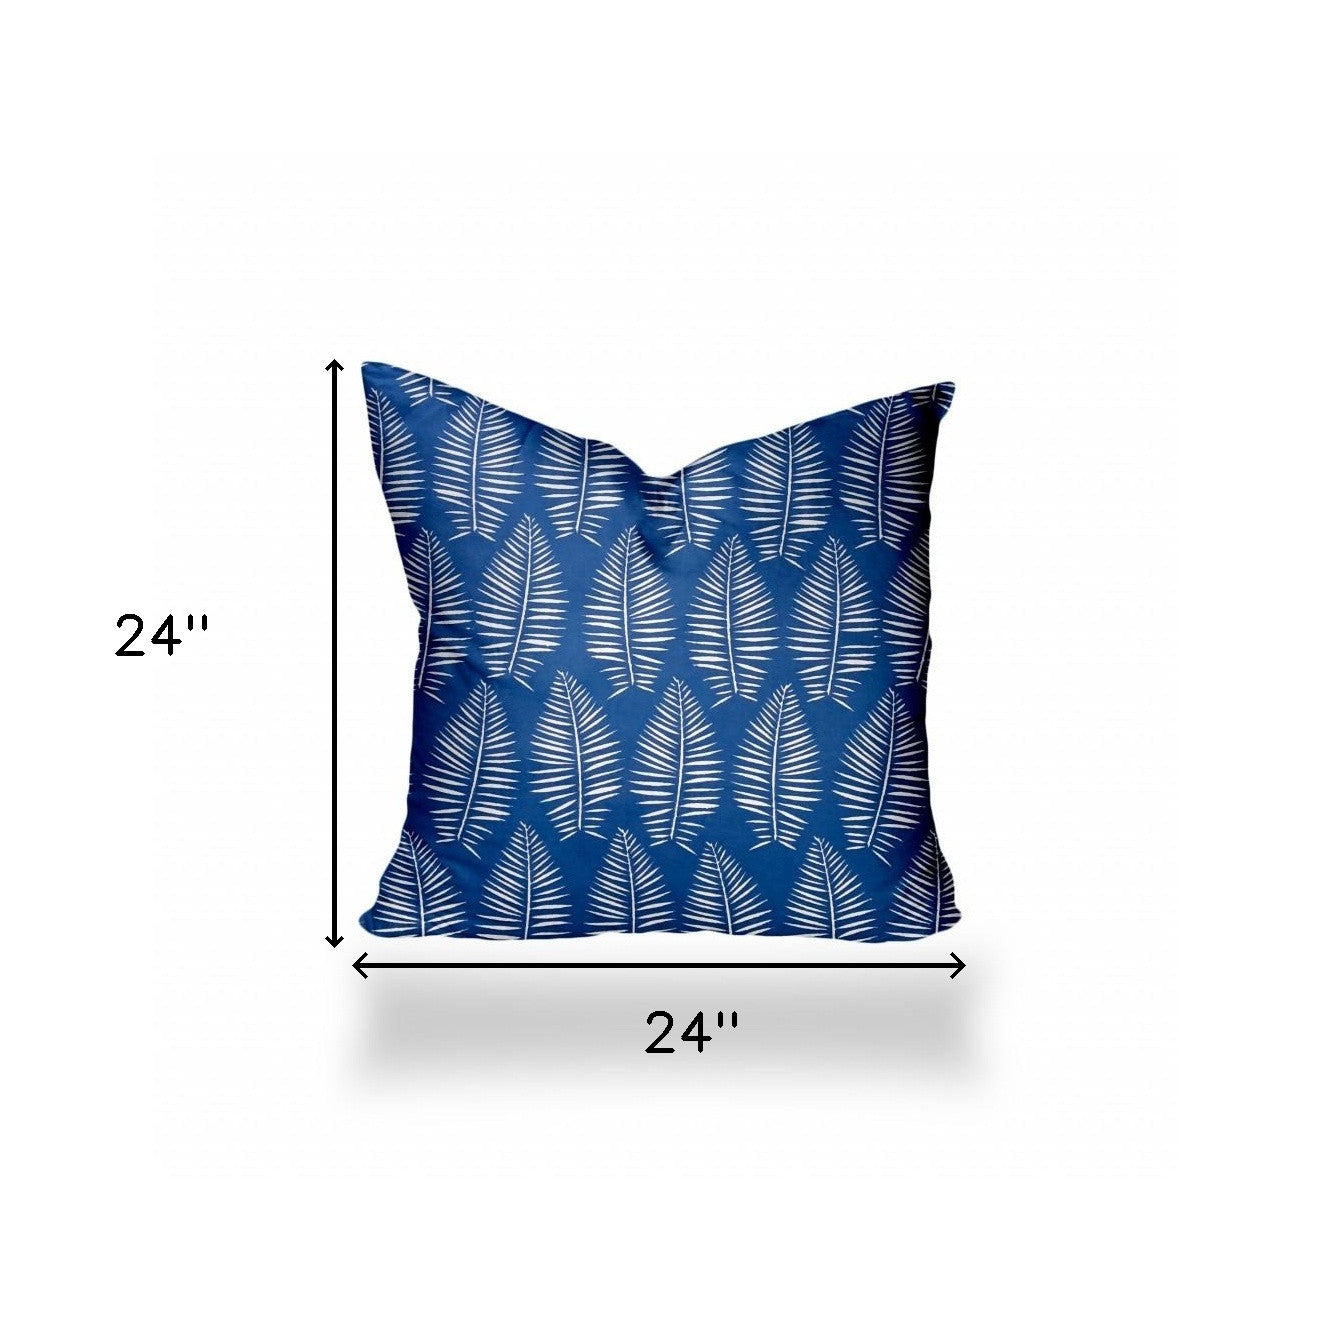 24" X 24" Blue And White Zippered Tropical Throw Indoor Outdoor Pillow Cover